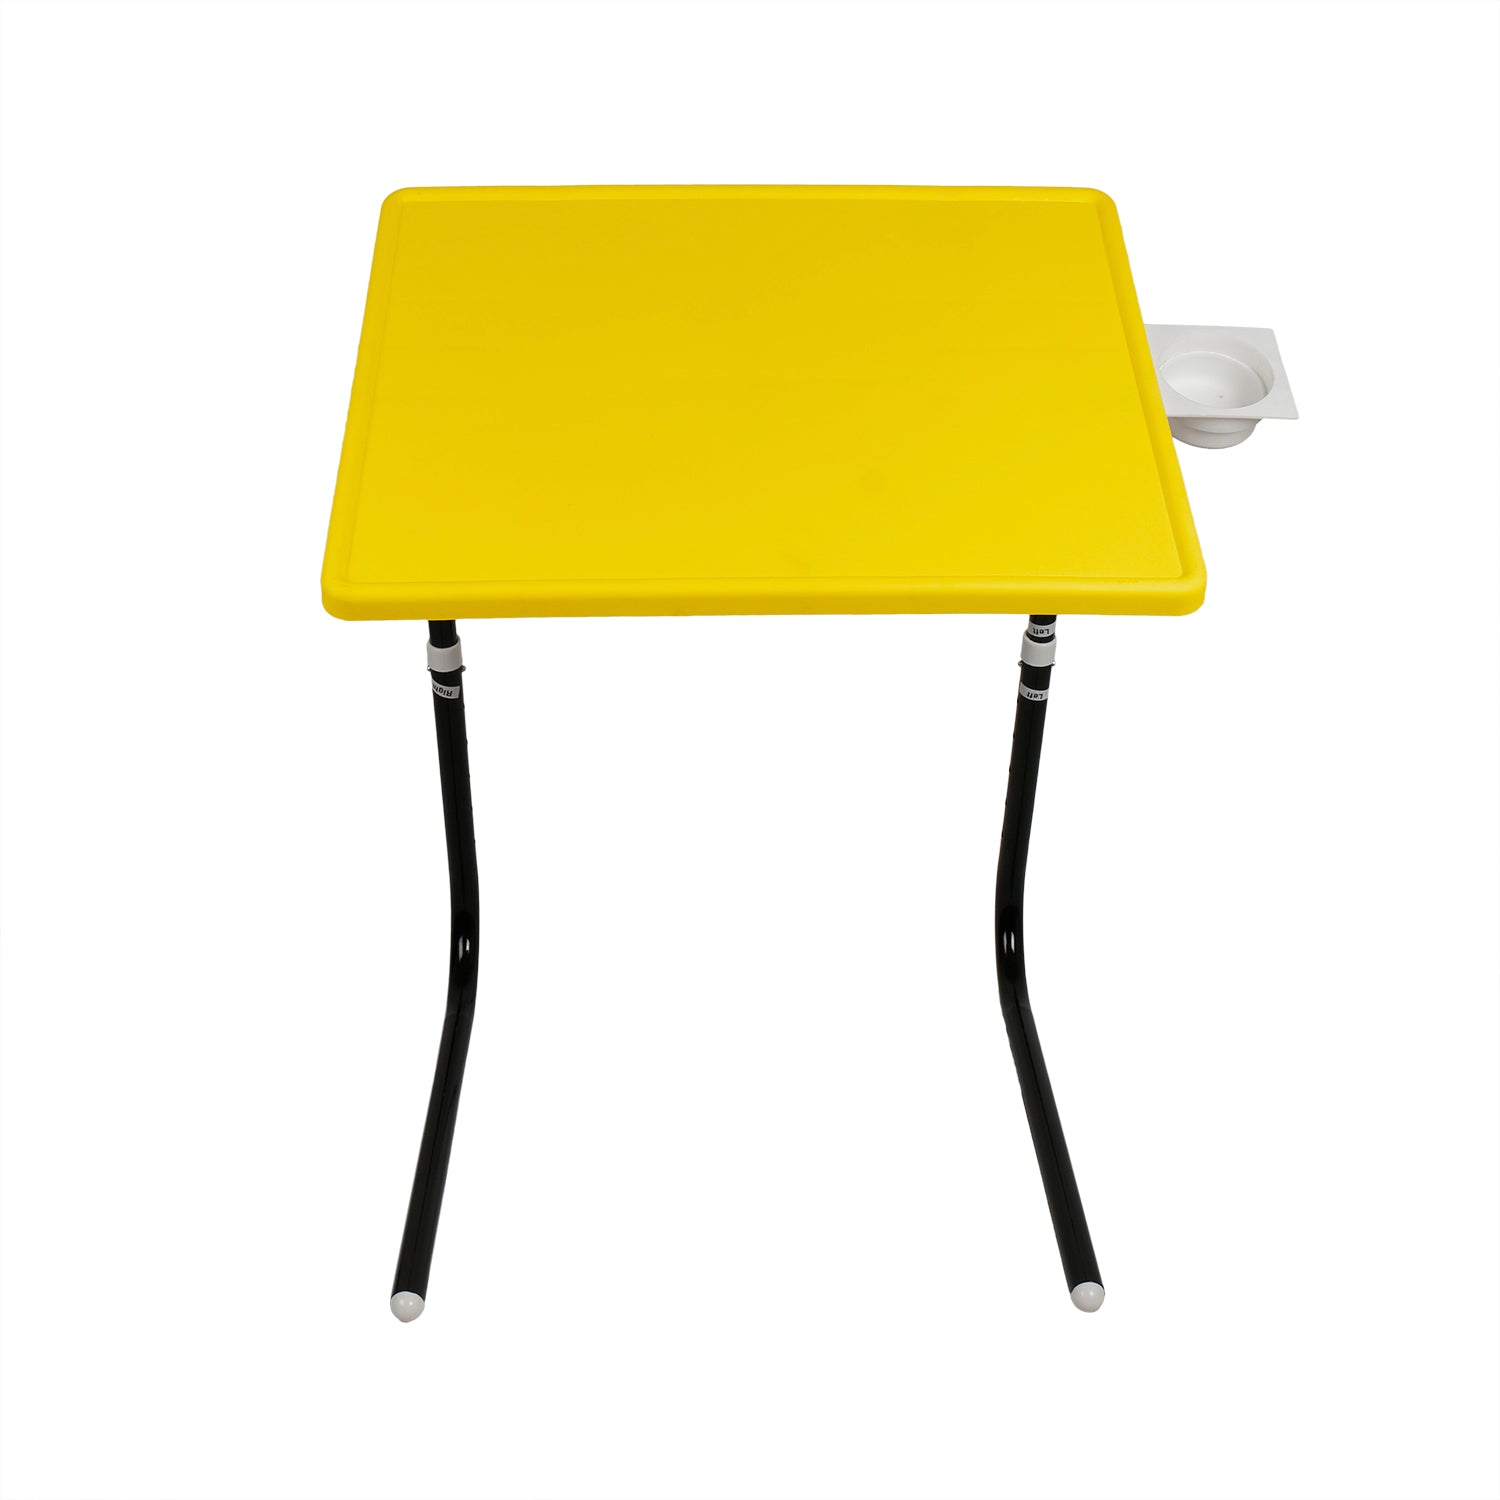 Tablemate with Yellow finishing | Wudore